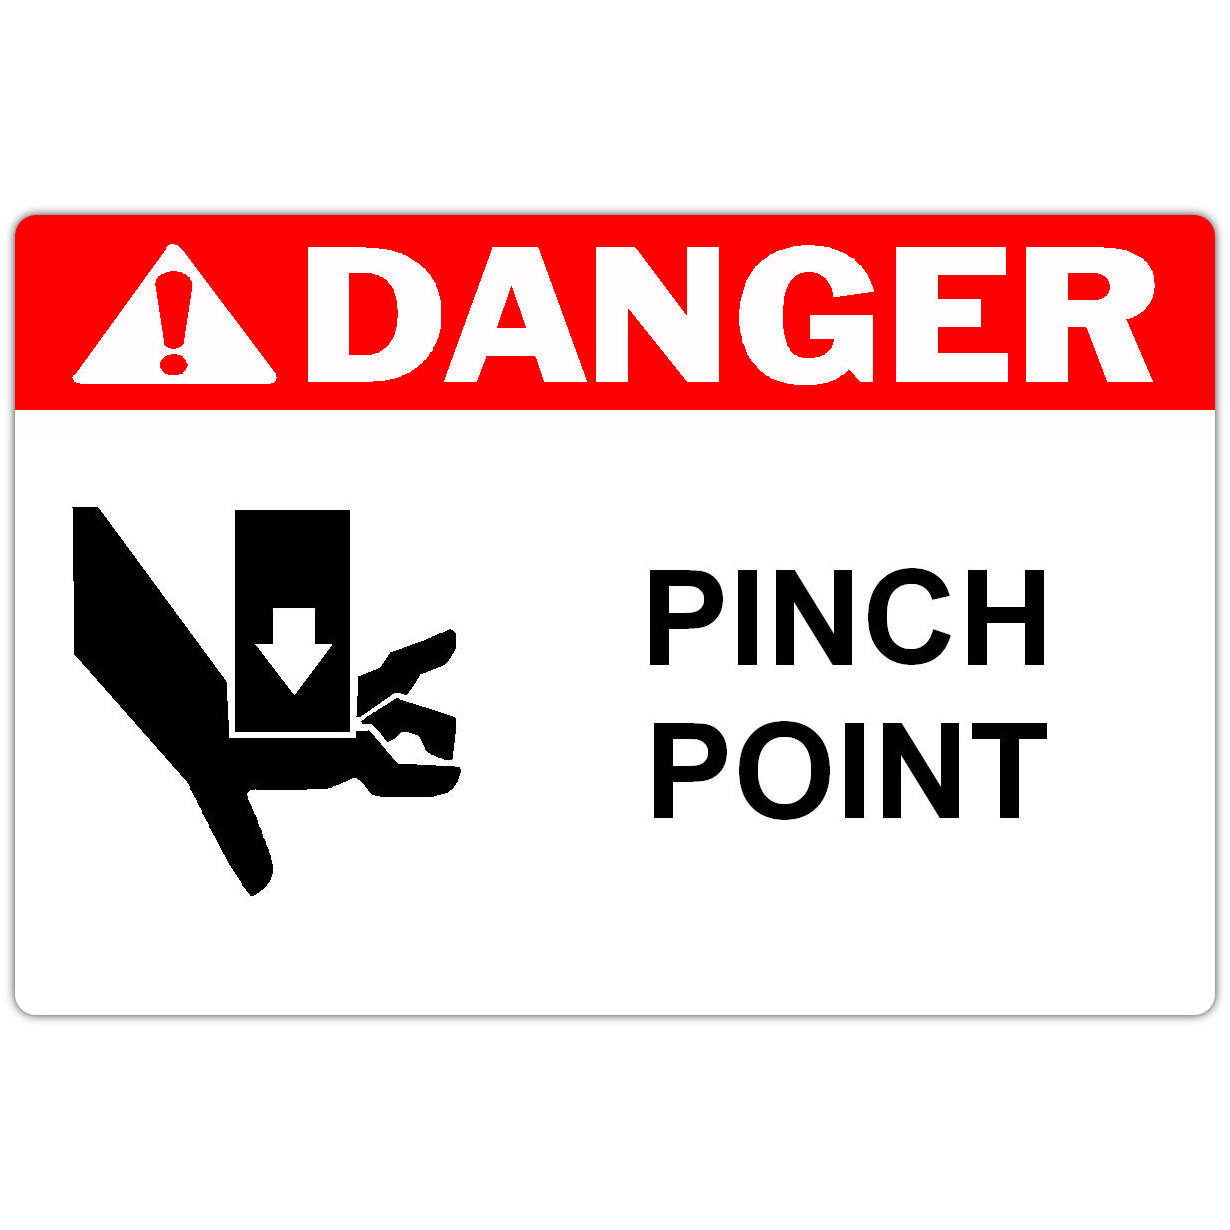 Detail view for 4" x 6" DANGER Pinch Point Safety Label